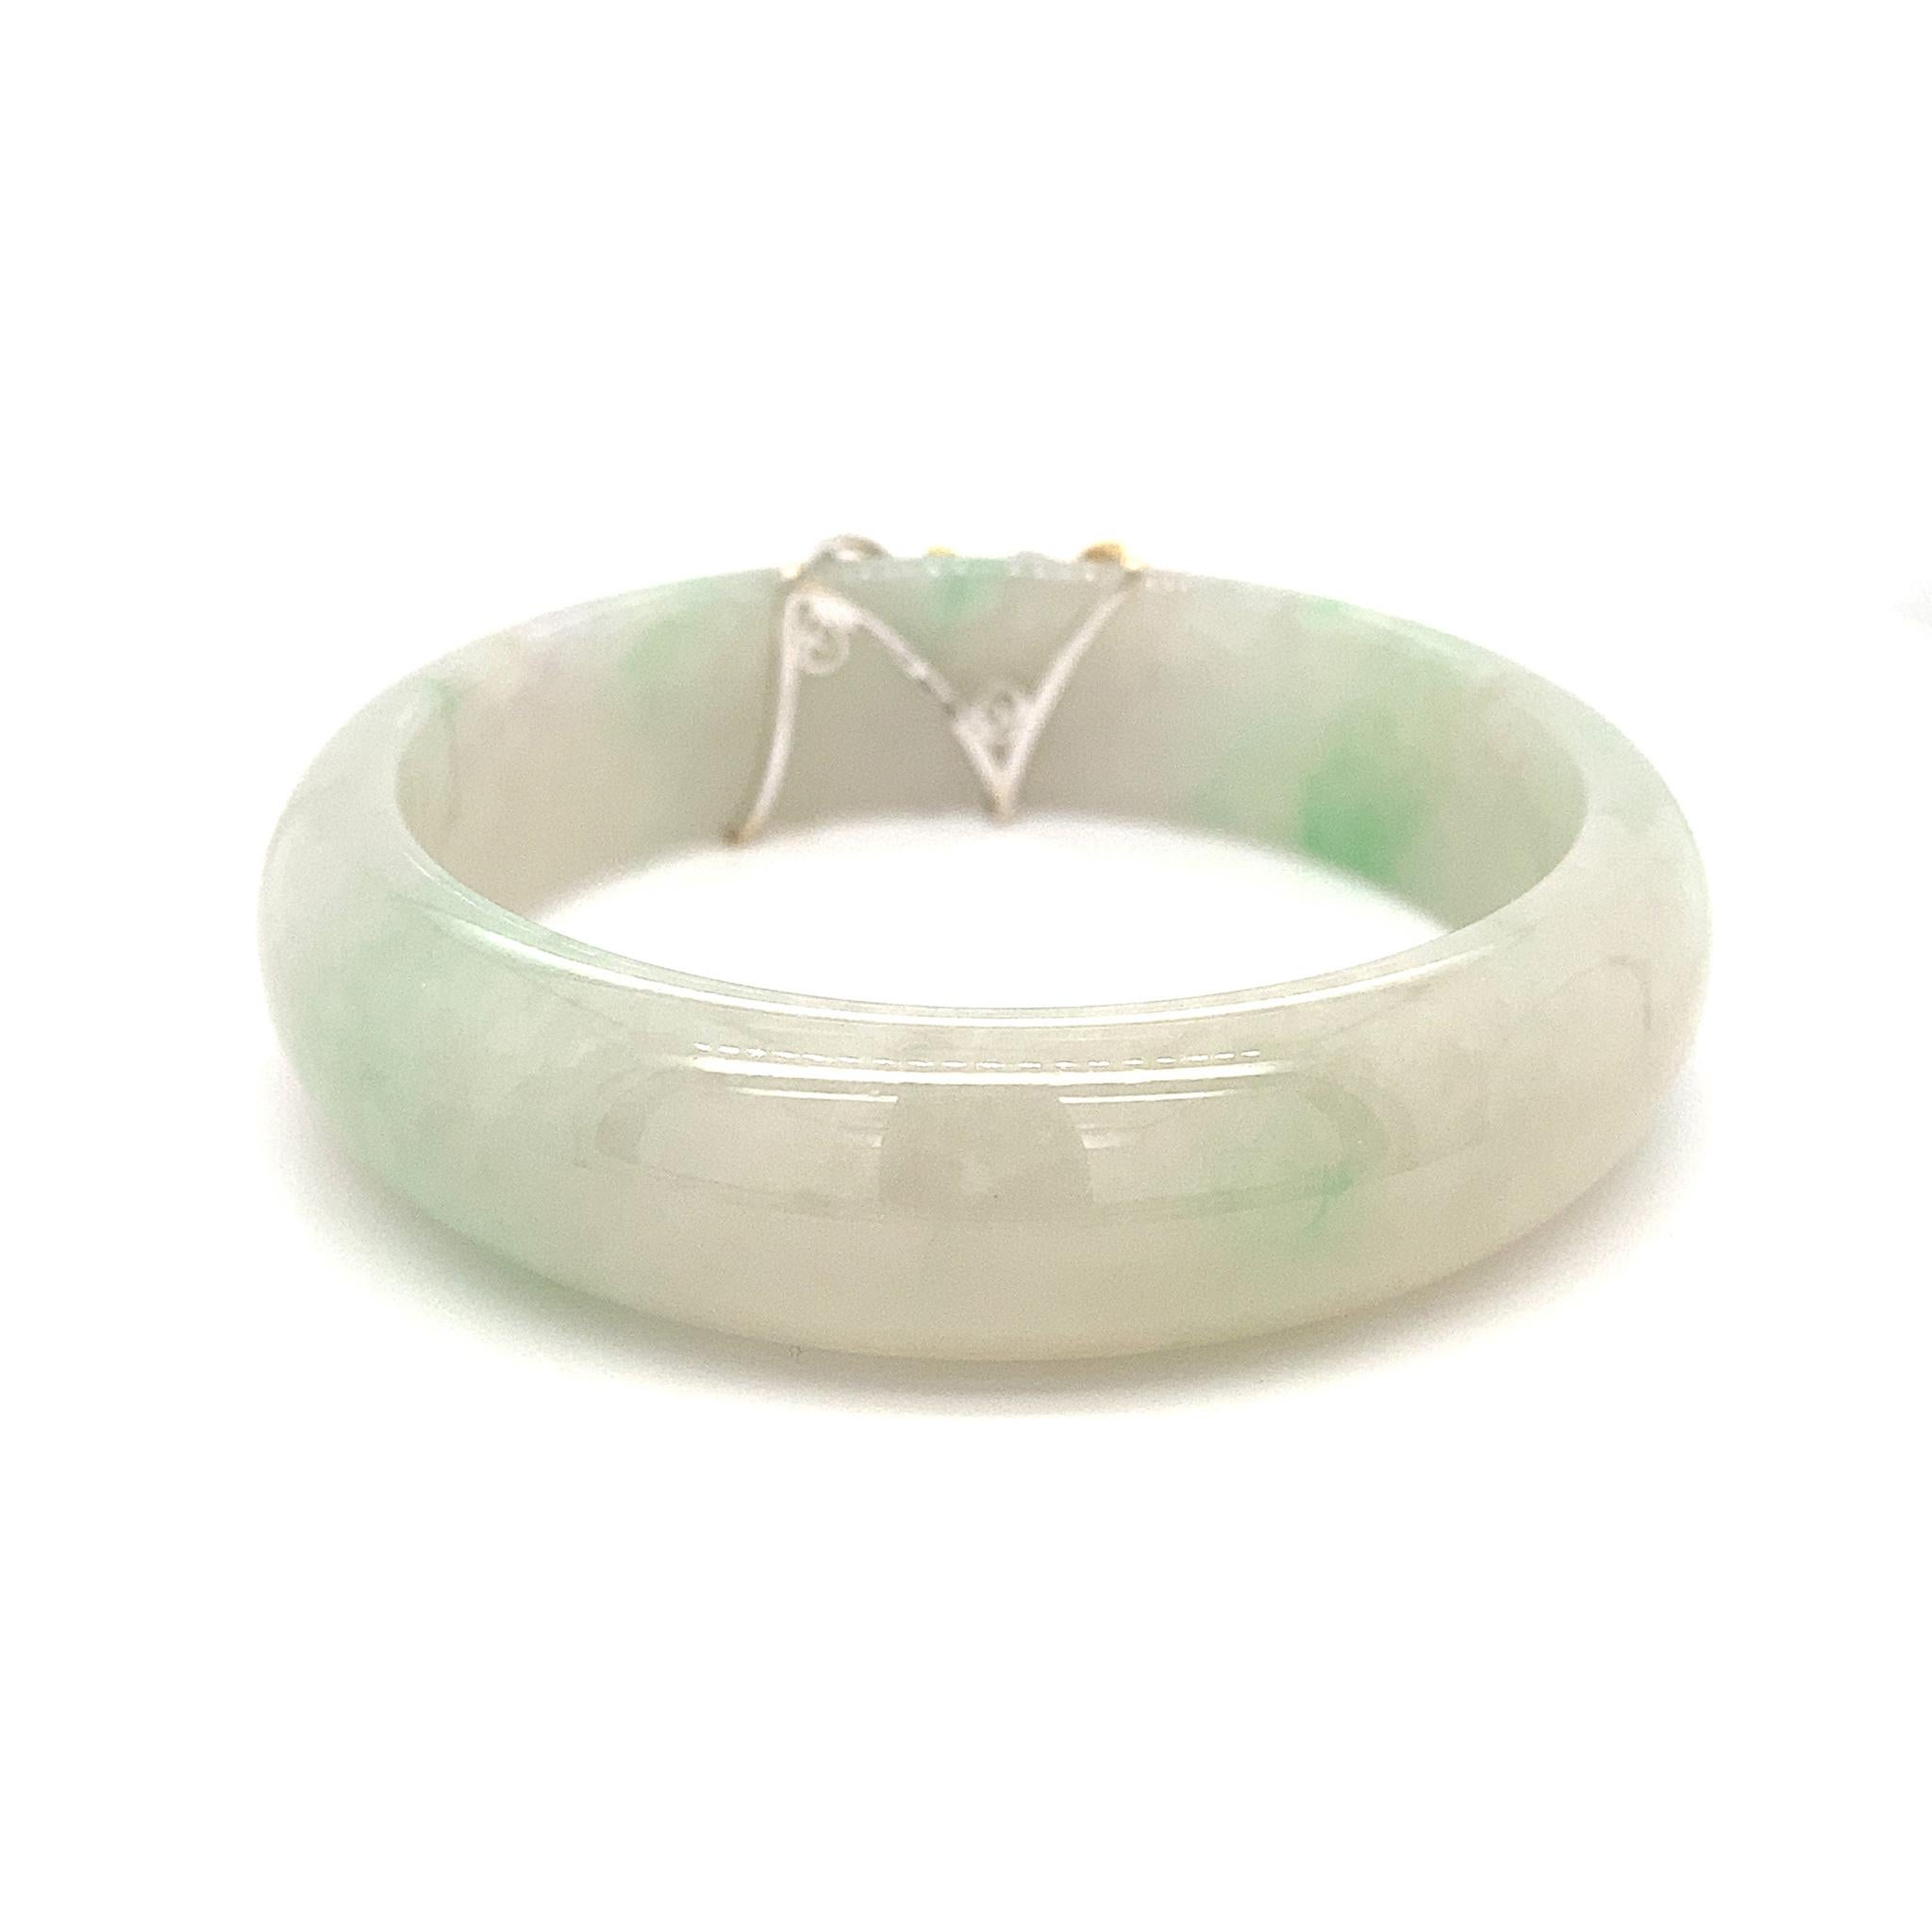 Artisan HKJSL Certified Jade 'Botanica' Bangle by Dilys' in 18K Yellow & White Gold For Sale